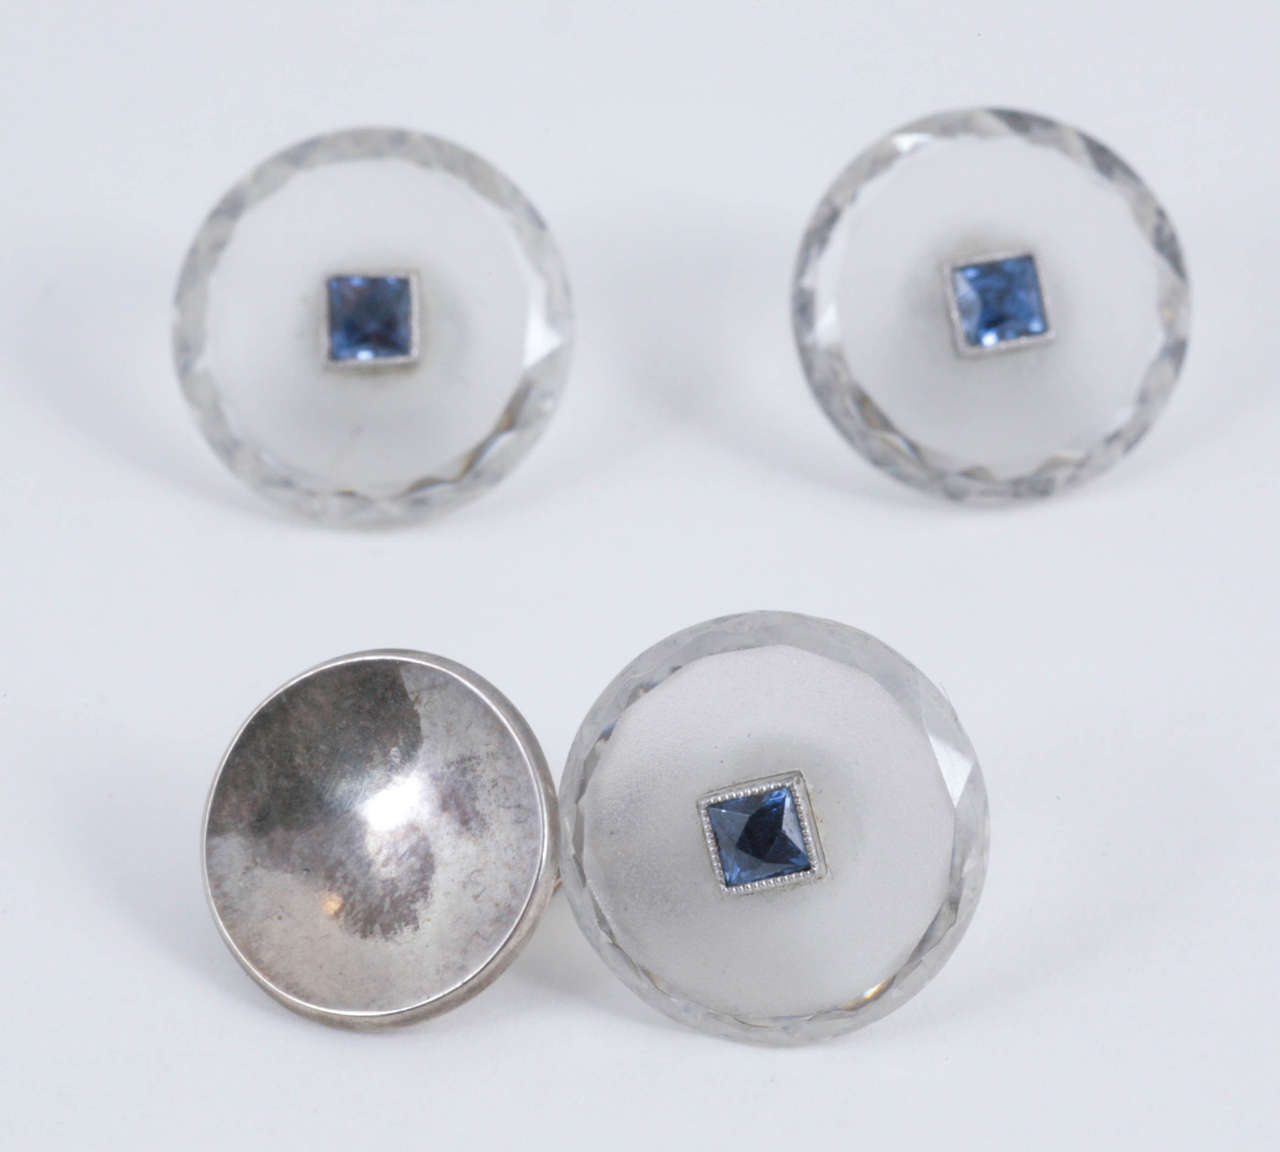 Set Of Early 20th Century Crystal Cufflinks, Buttons, And Studs, With Facetted Border And Centre Square Cut Sapphire. Mounted In Gold.